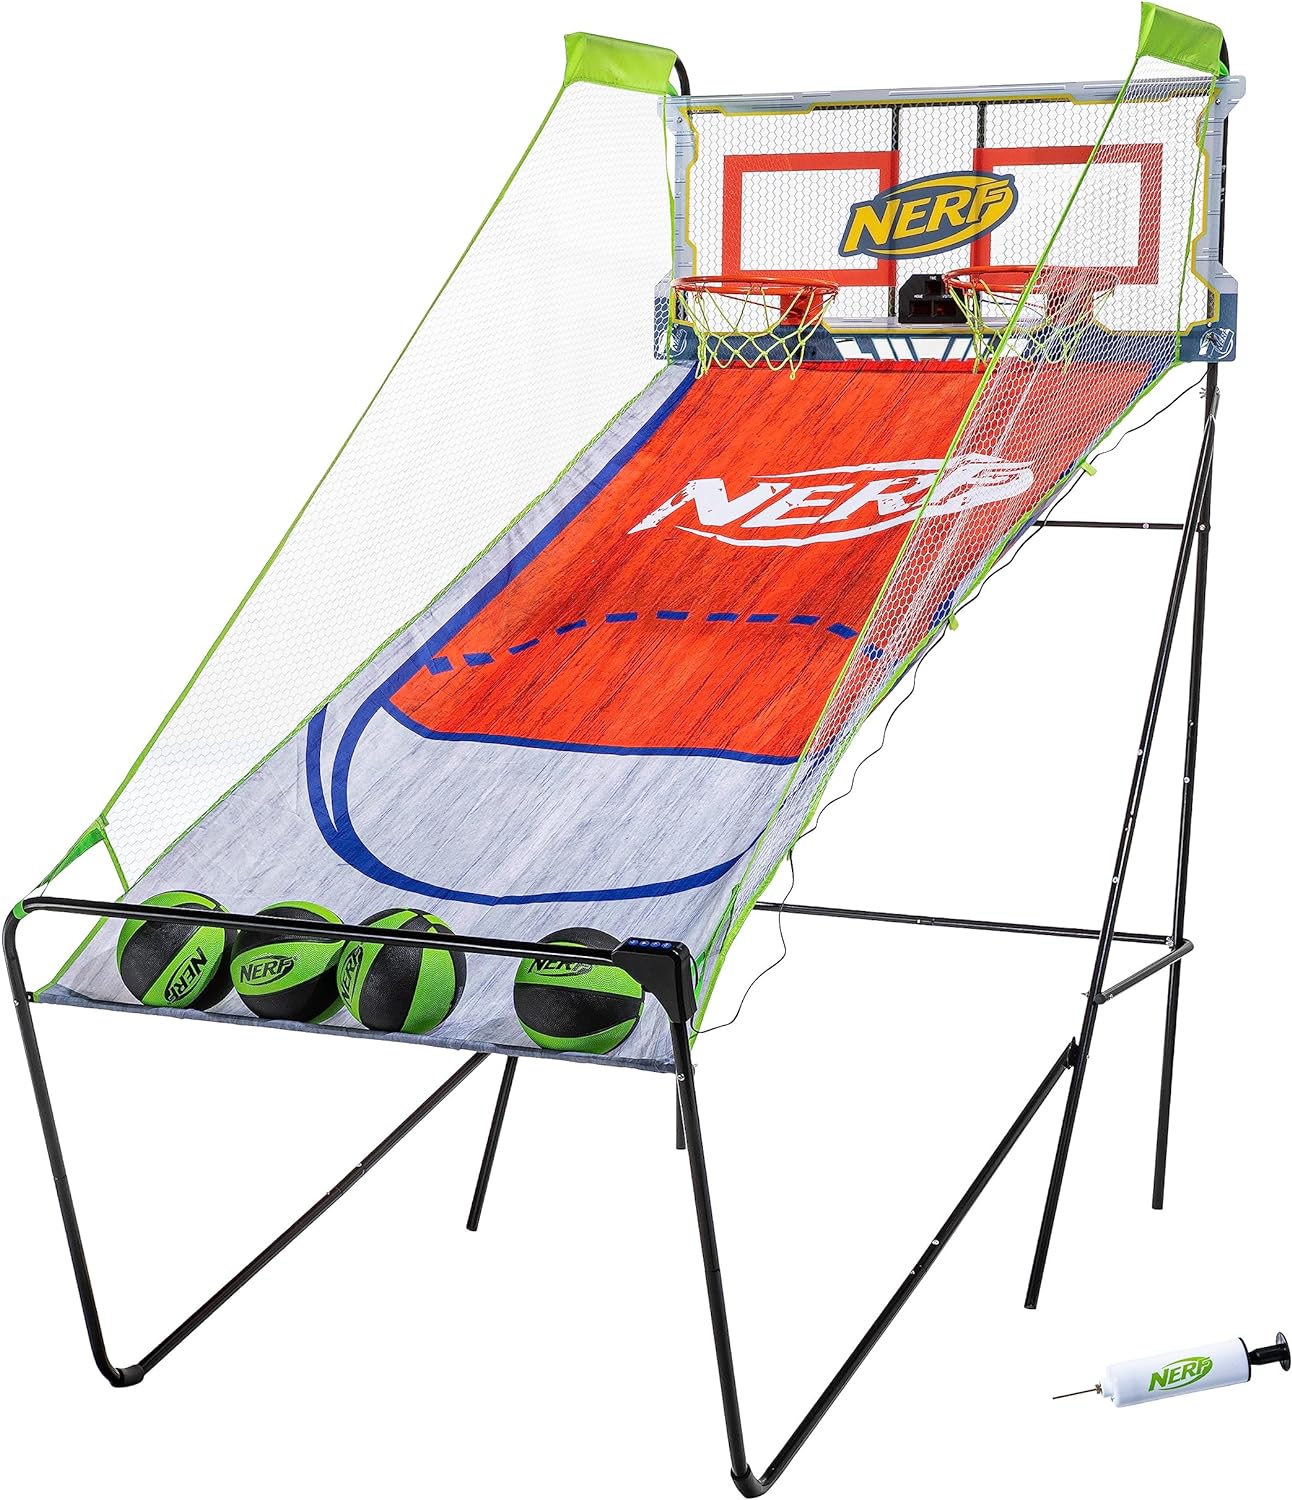 This Nerf basketball arcade game is easy to assemble. It took me about 30 minutes.It is a little flimsy, but folds up nicely for storage.My kids have had hours of fun playing basketball with this thing. I have four children so they take turns doing competitions. It is also fun for the adults!This would be great to use during family functions or birthday parties!Overall, this is very fun and very easy to assemble!